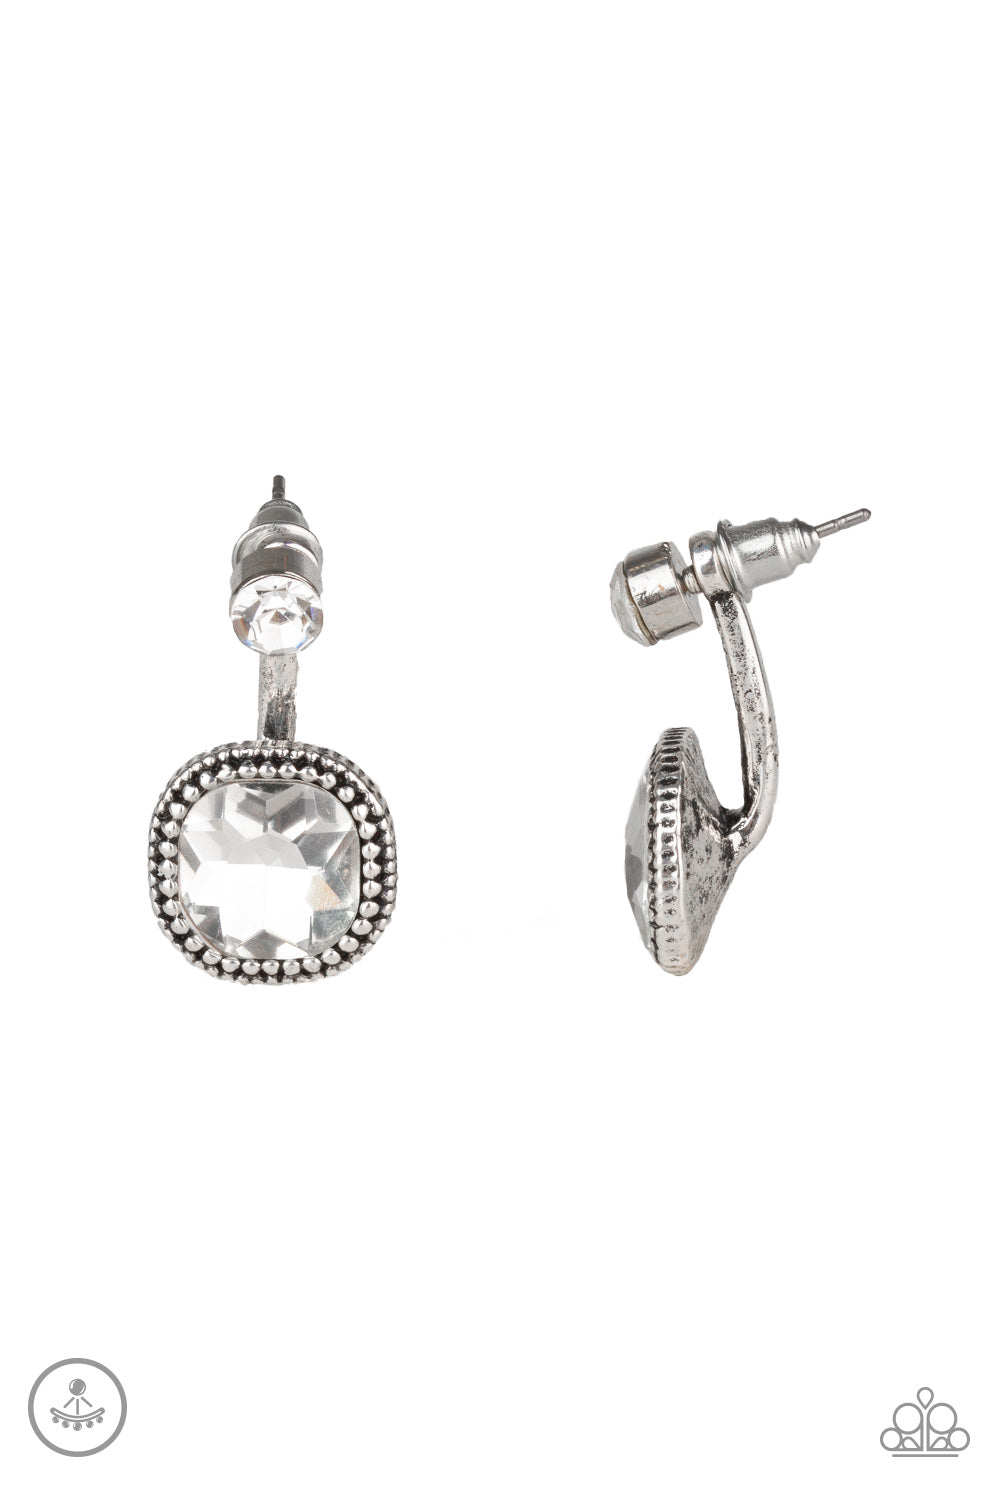 Paparazzi Accessories - Celebrity Cache - White Earrings